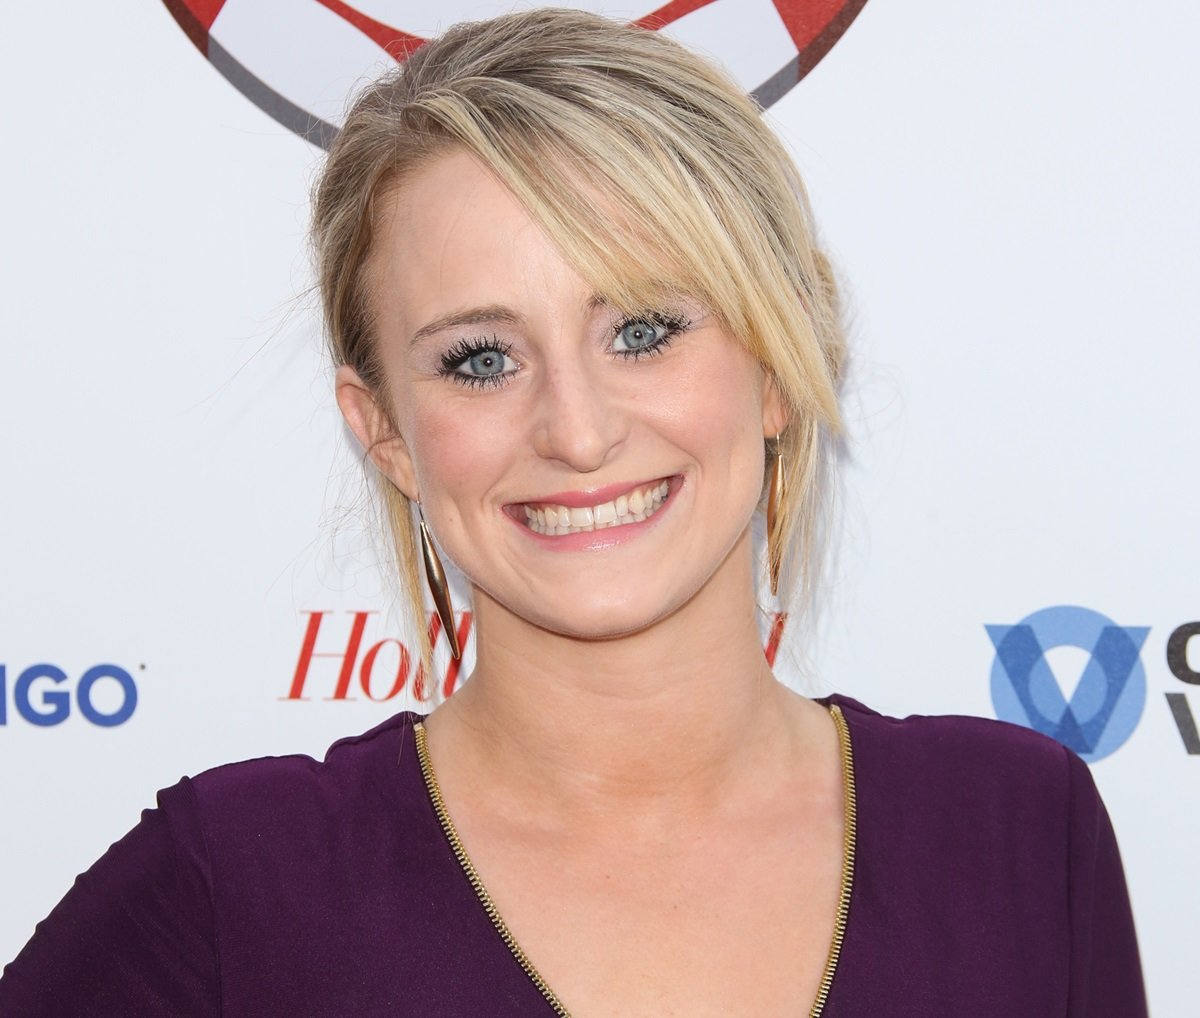 Leah Messer attends the 5th Annual Variety Texas Hold 'Em poker tournament benefiting The Children's Charity Of SoCal at Paramount Studios